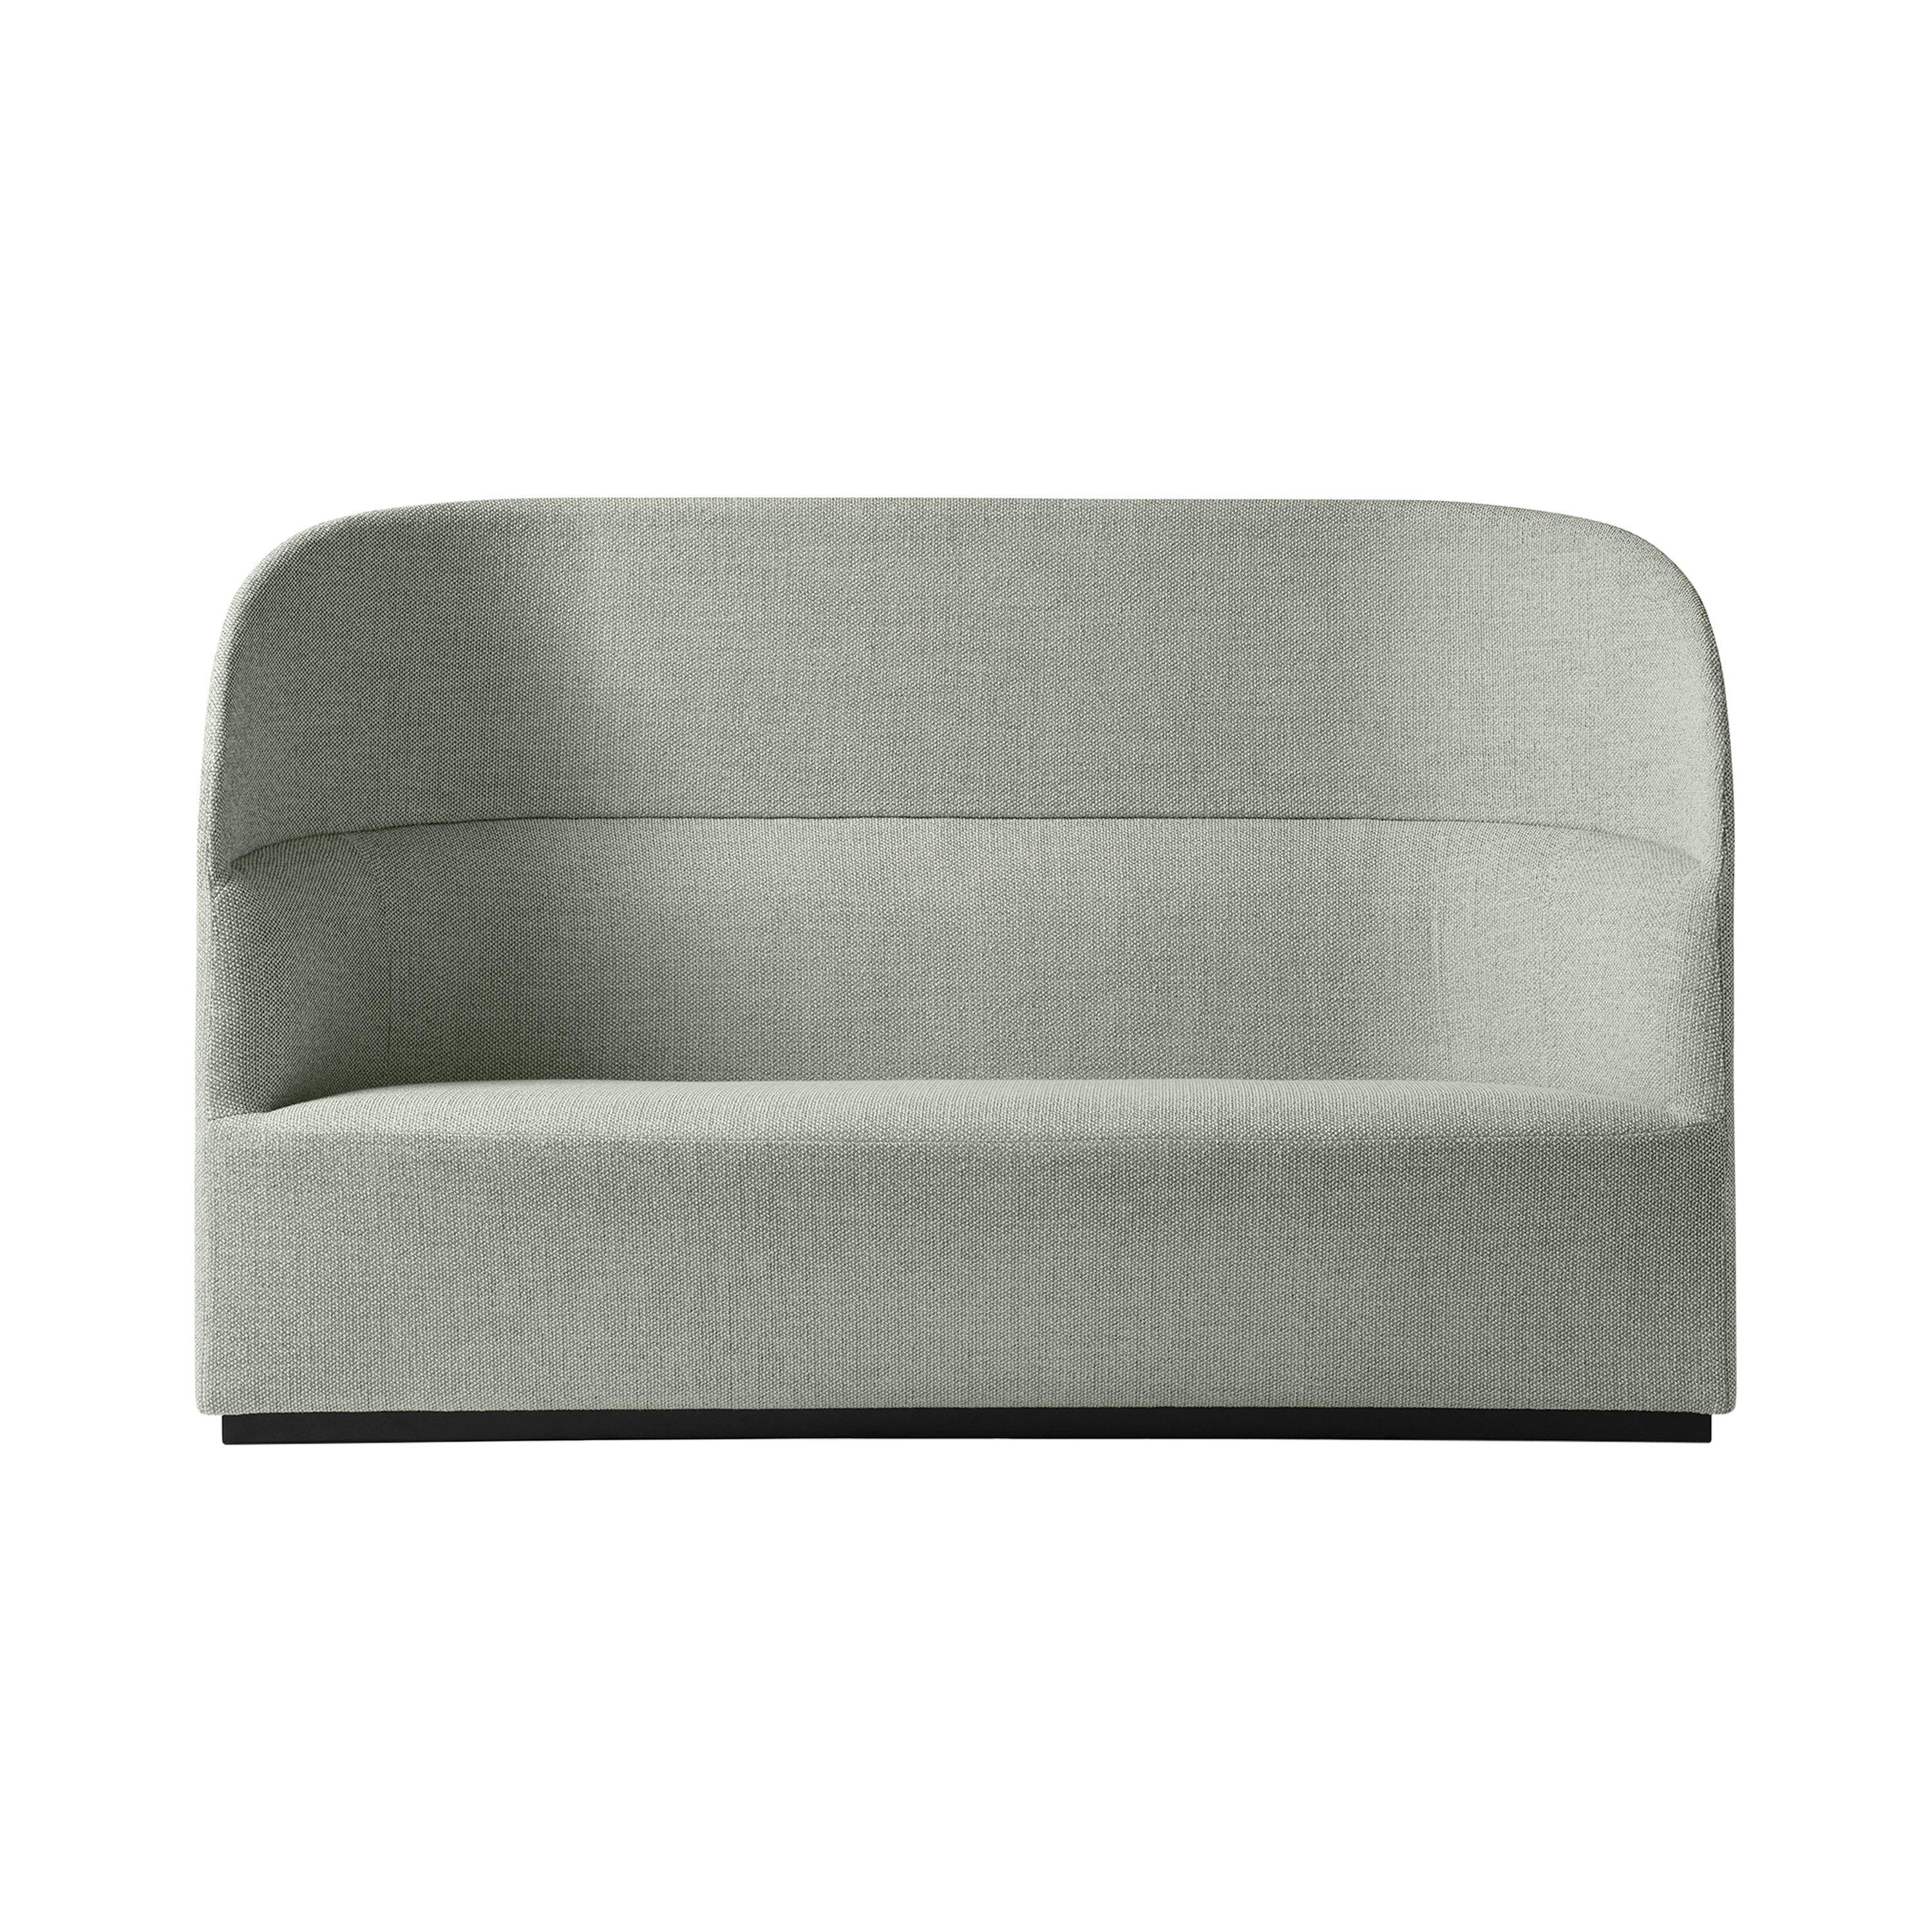 Tearoom Highback Sofa: Without Power Outlet + Safire 006